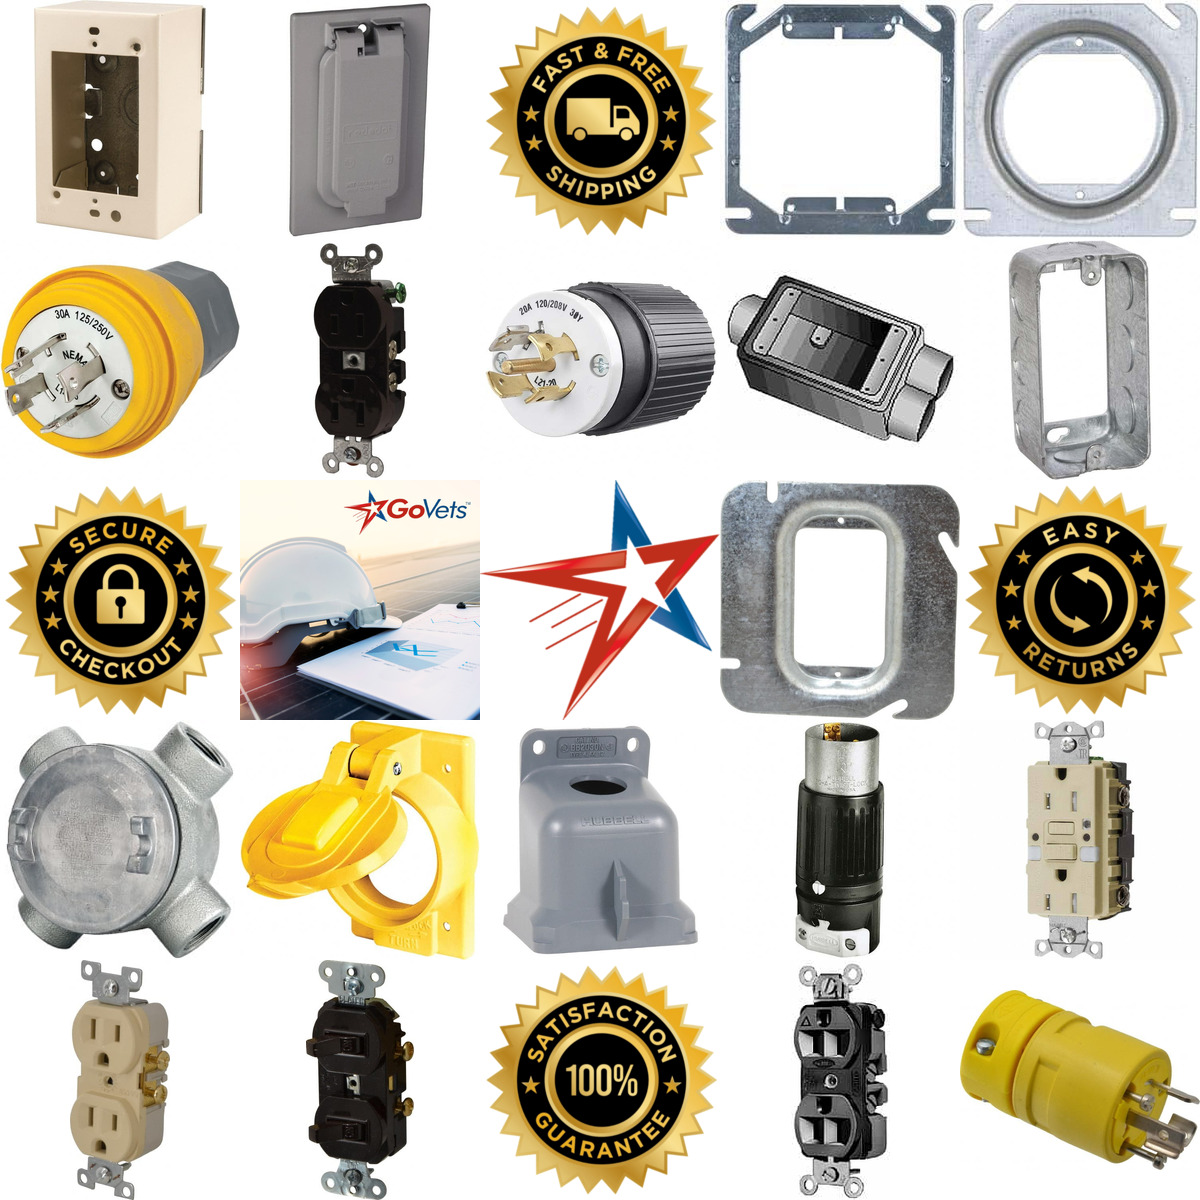 A selection of Outlet Receptacles Plugs Boxes and Wall Plates products on GoVets